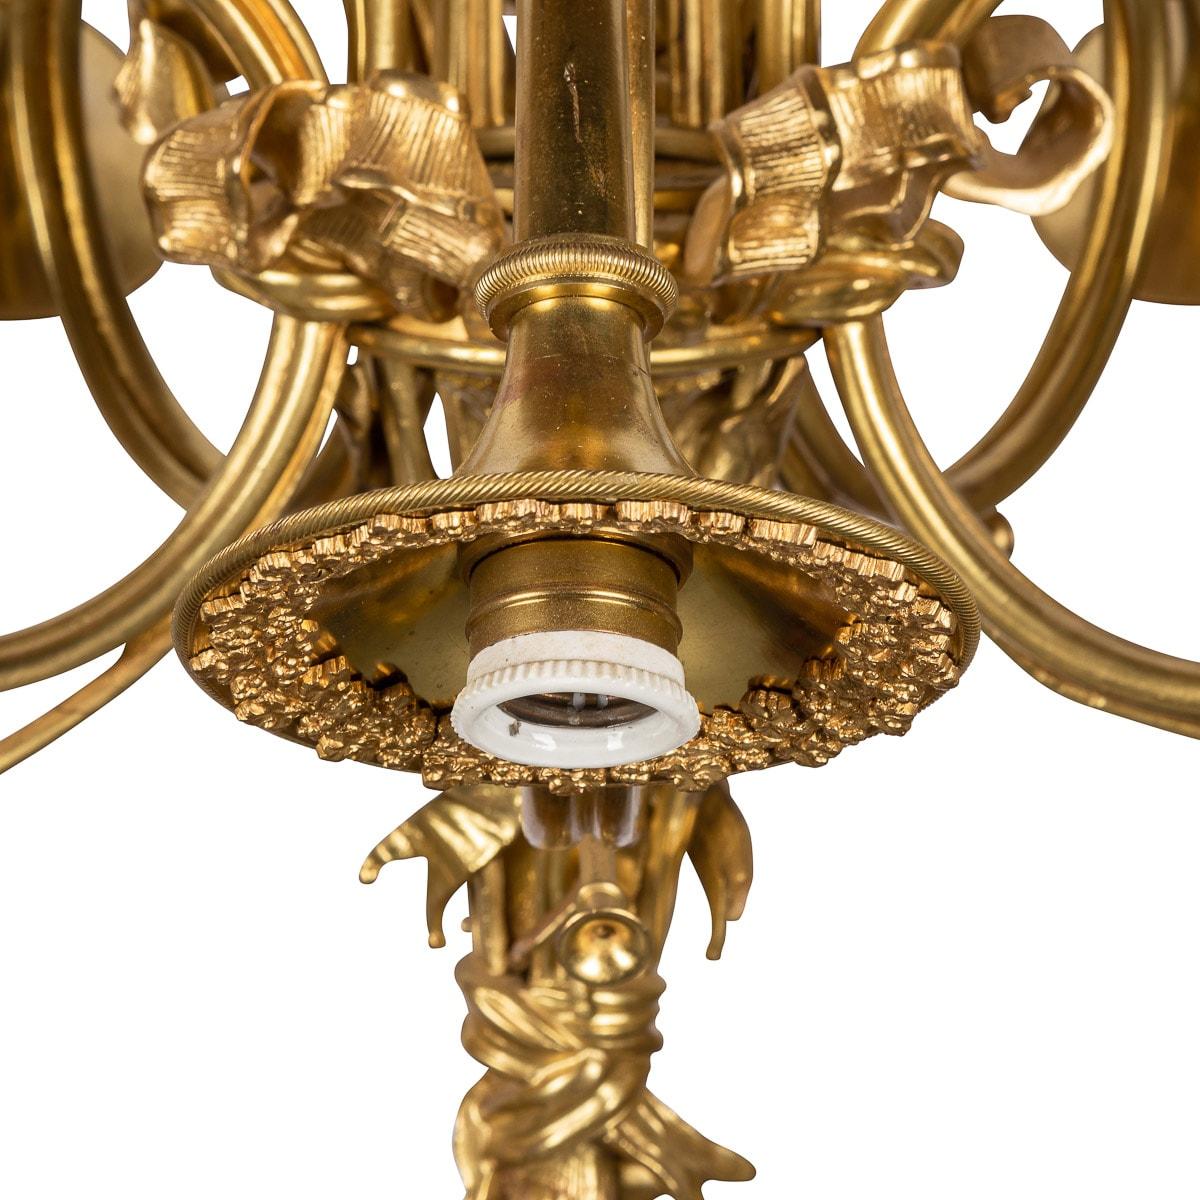 19th Century French Empire Ormolu Chandelier With Trumpet Light Fittings, c.1870 For Sale 2